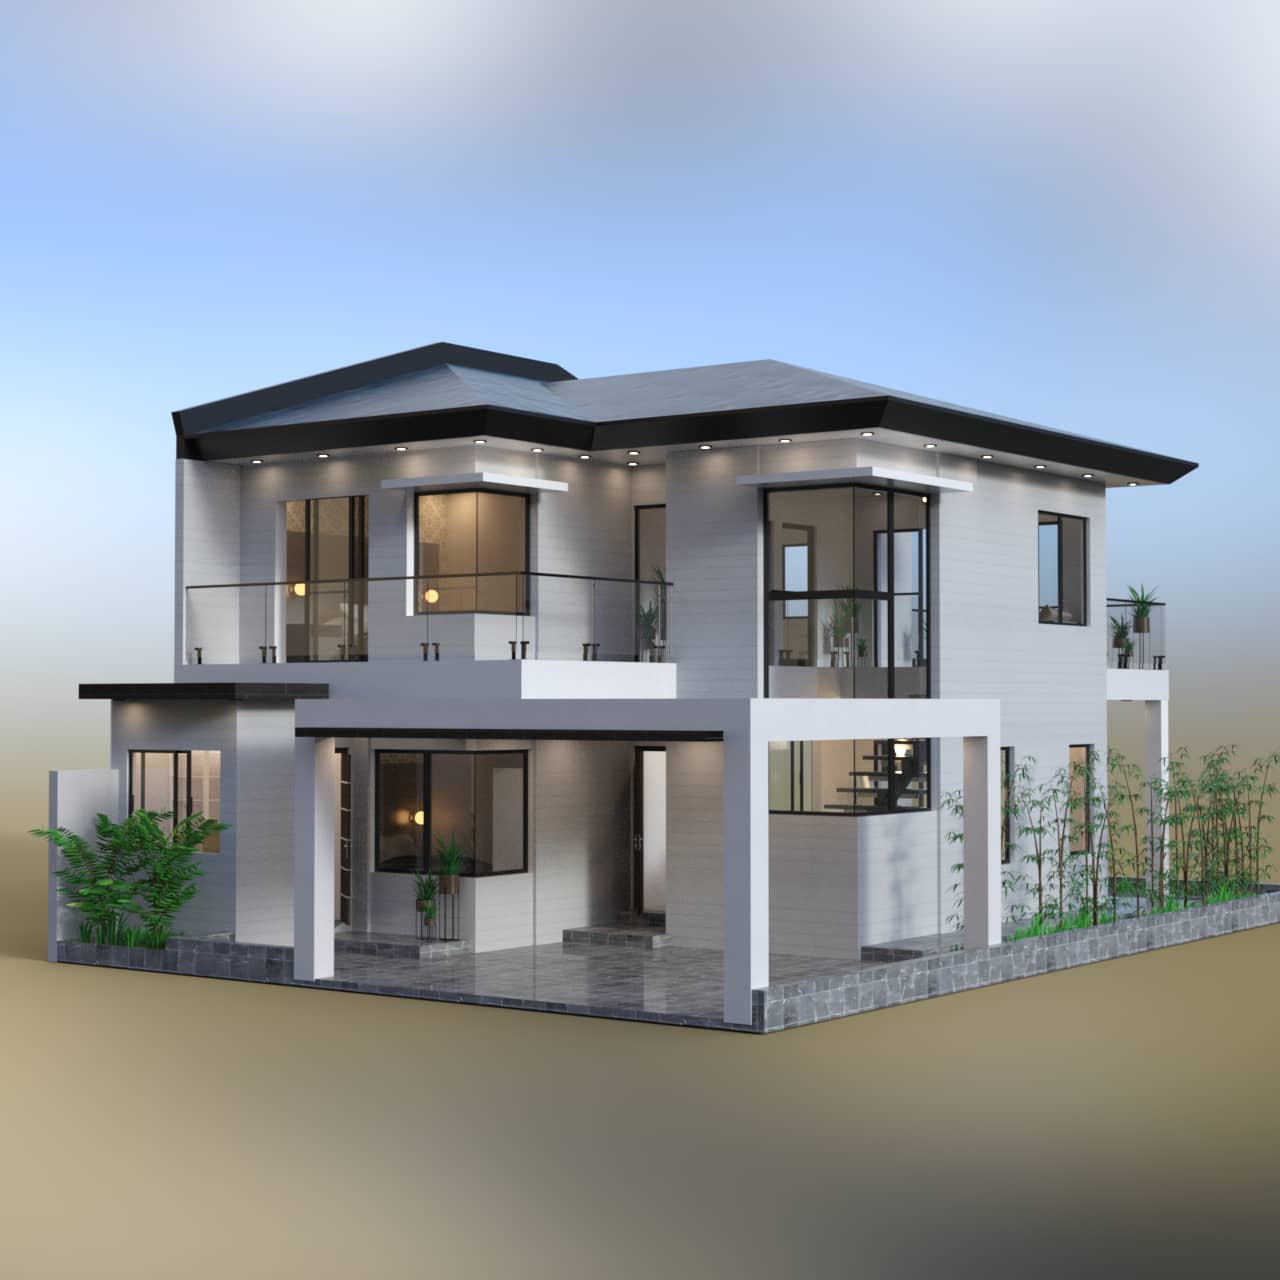 Outside view of the vacation house 3d model